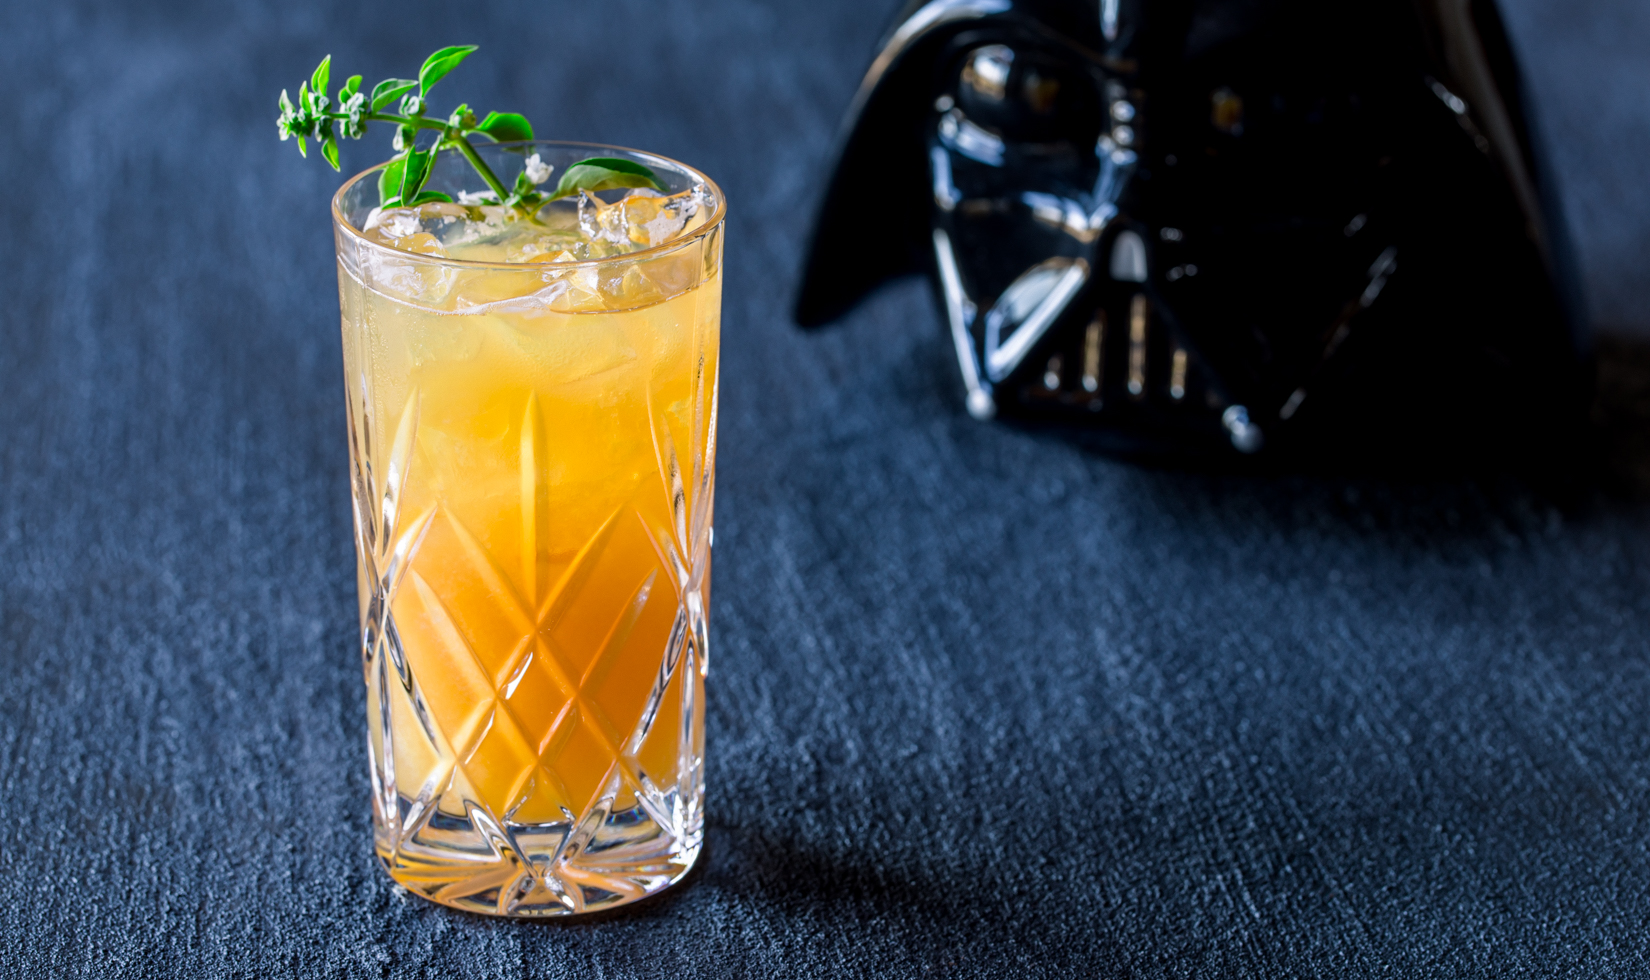 Dark and Stormy Trooper Halloween cocktail with Darth Vader helmet in the background